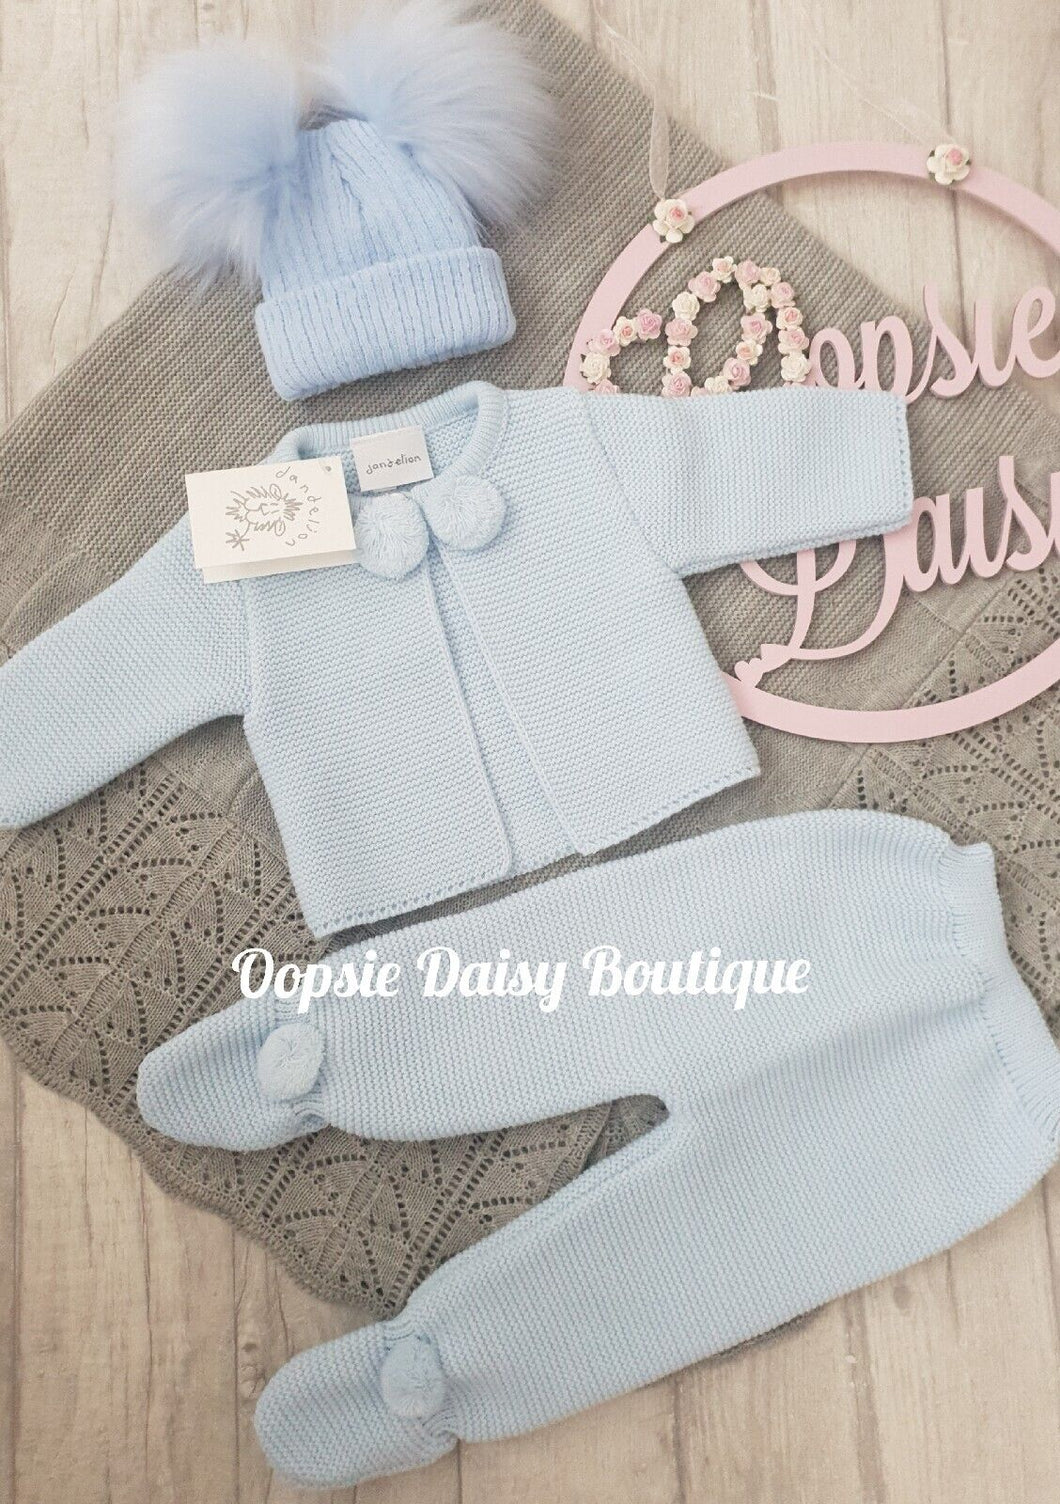 Boys Blue Knitted Pom Pom Suit - Dandelion/ All Hats Available Separately